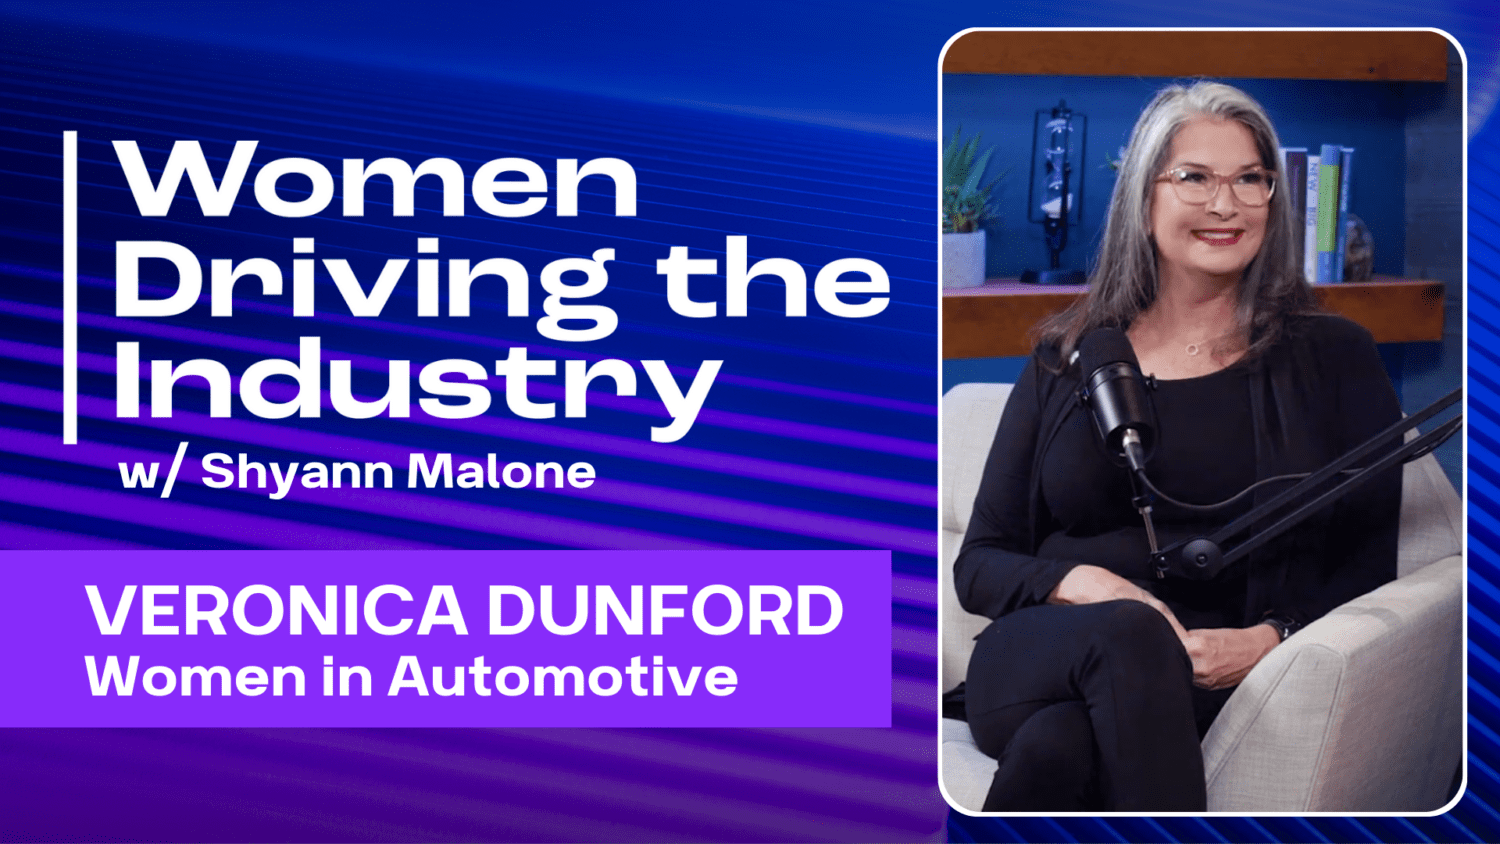 Veronica Dunford joins CBT News for the first episode of Women Driving the Industry, to discuss the importance of Women in Automotive.